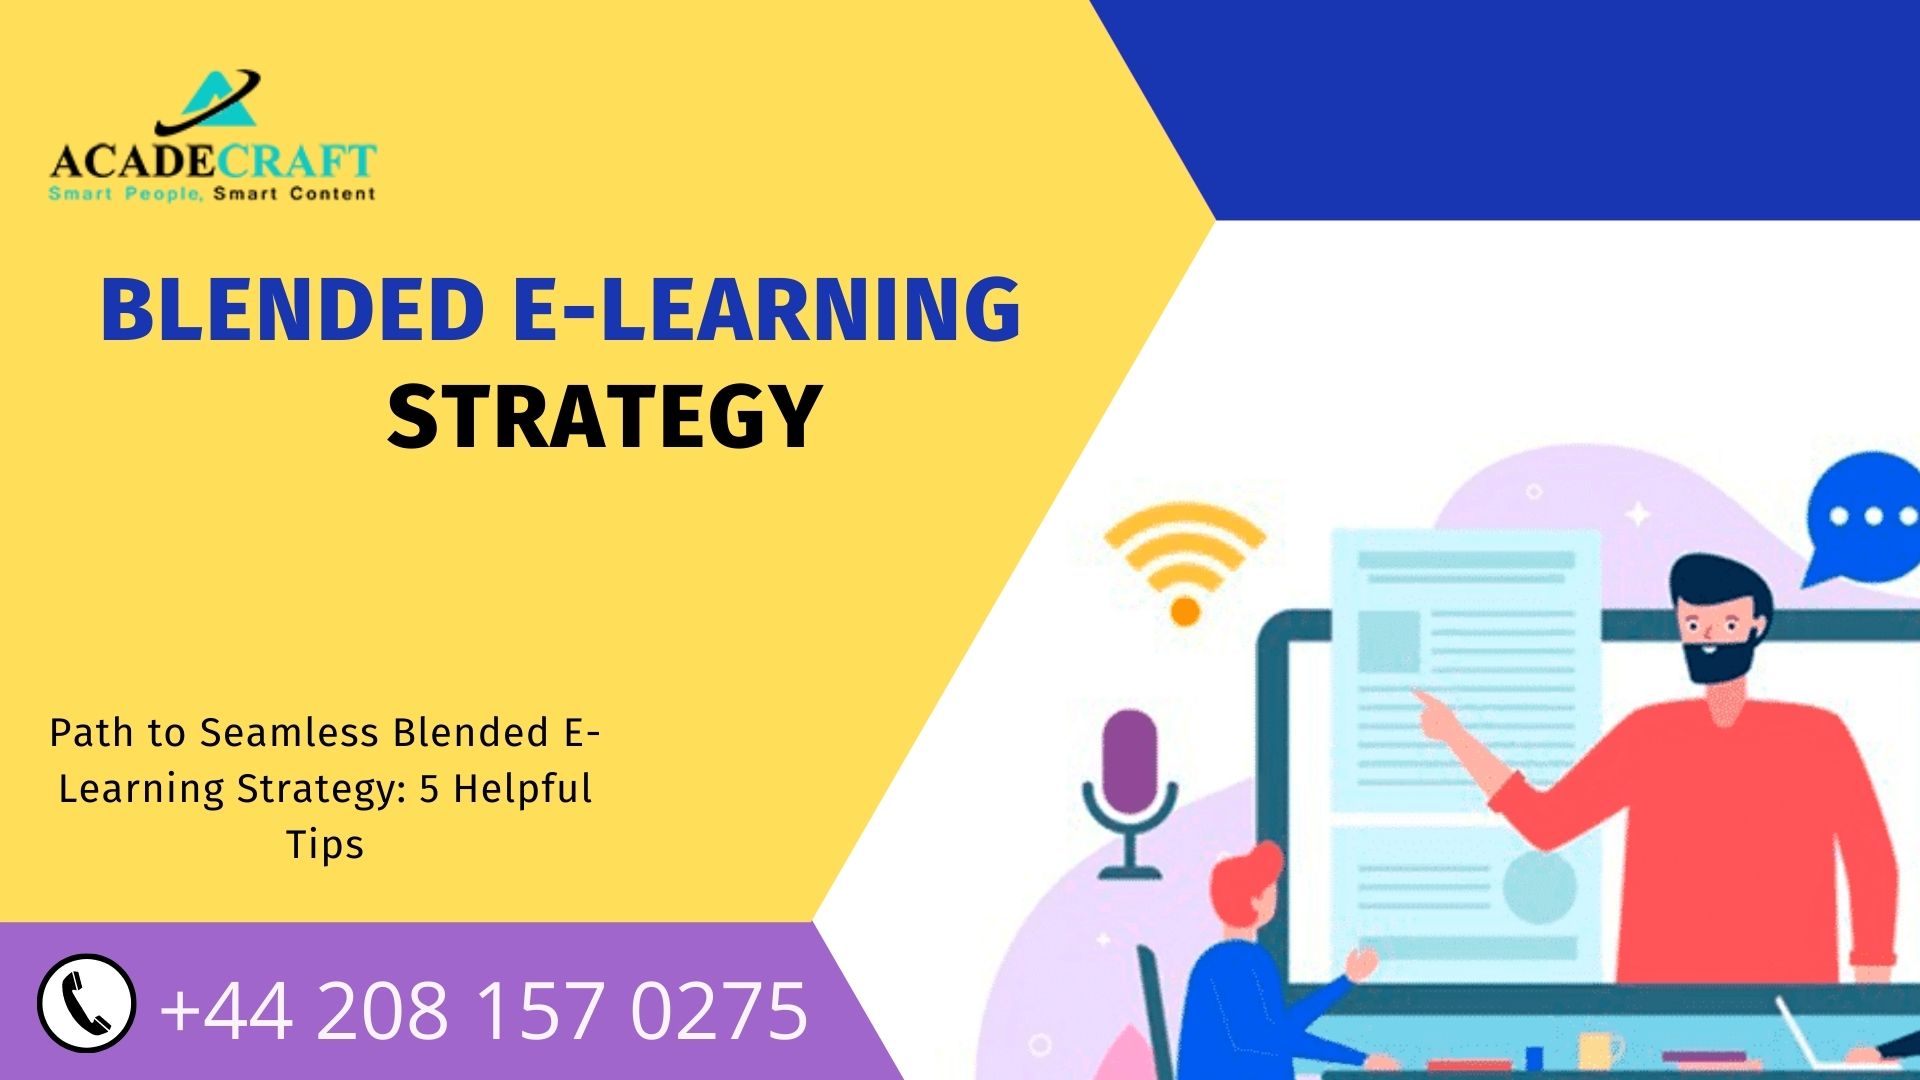 Path to Seamless Blended E-Learning Strategy: 5 Helpful Tips